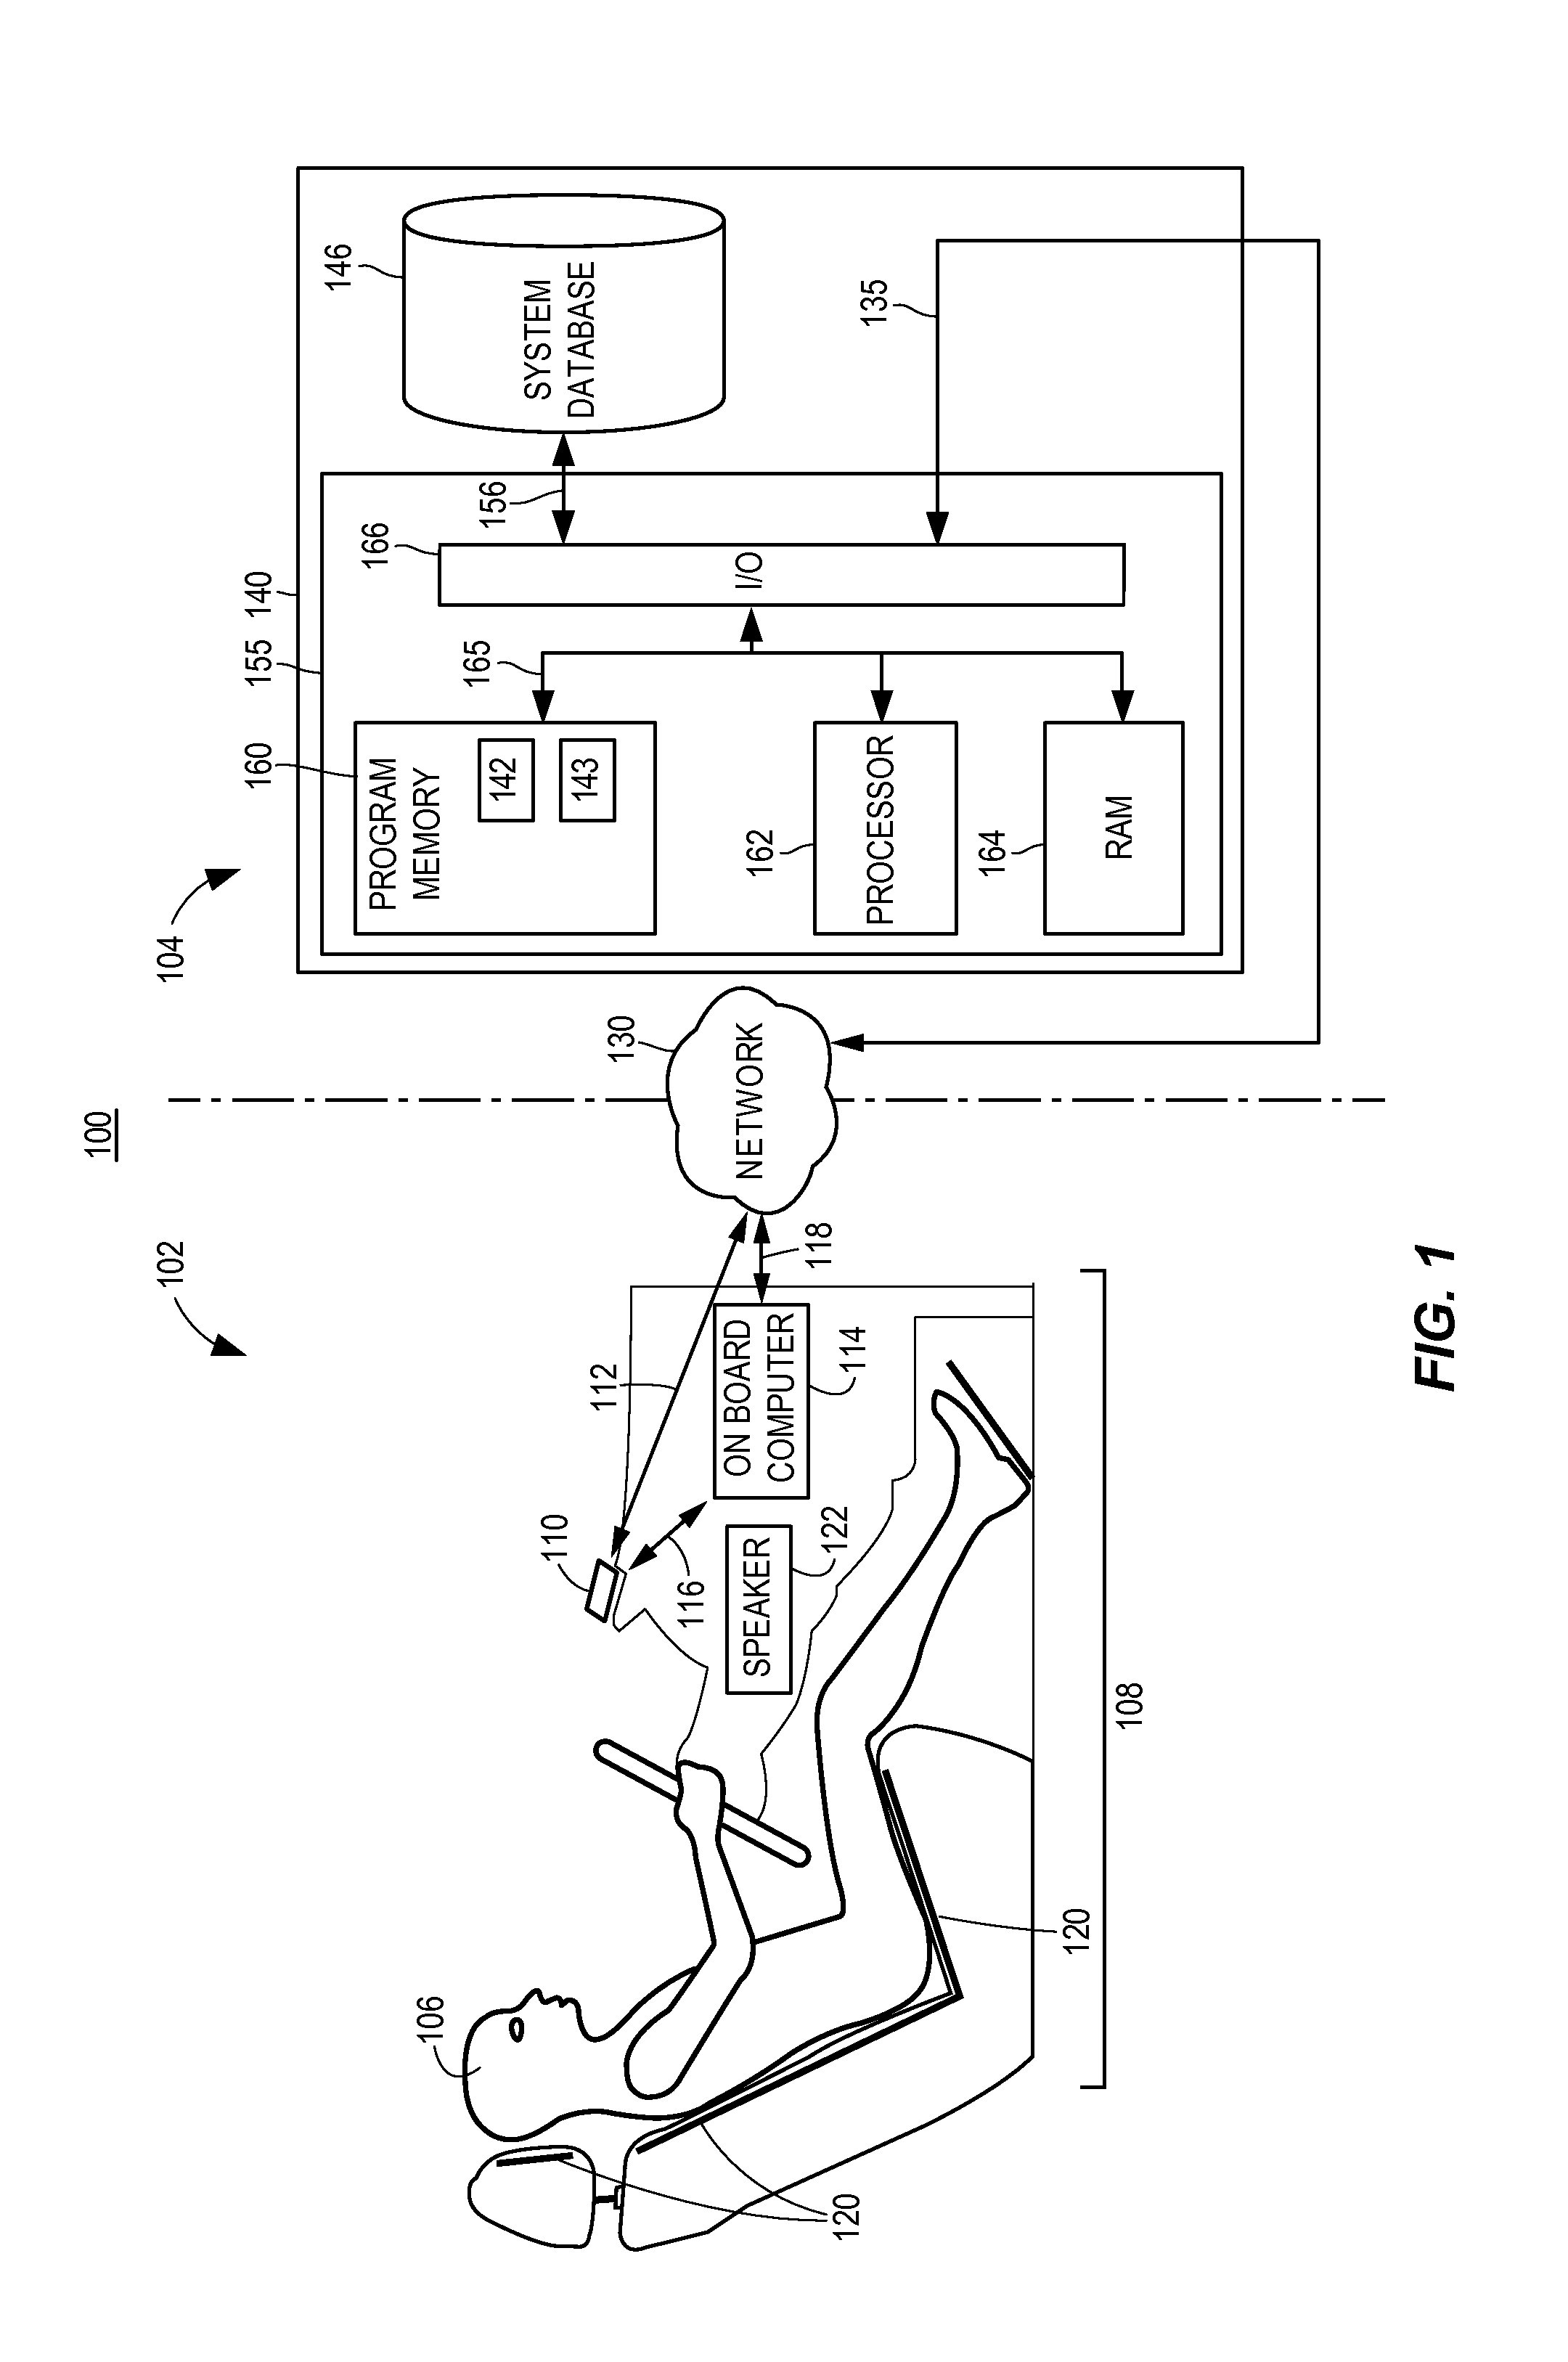 System and method to monitor and reduce vehicle operator impairment